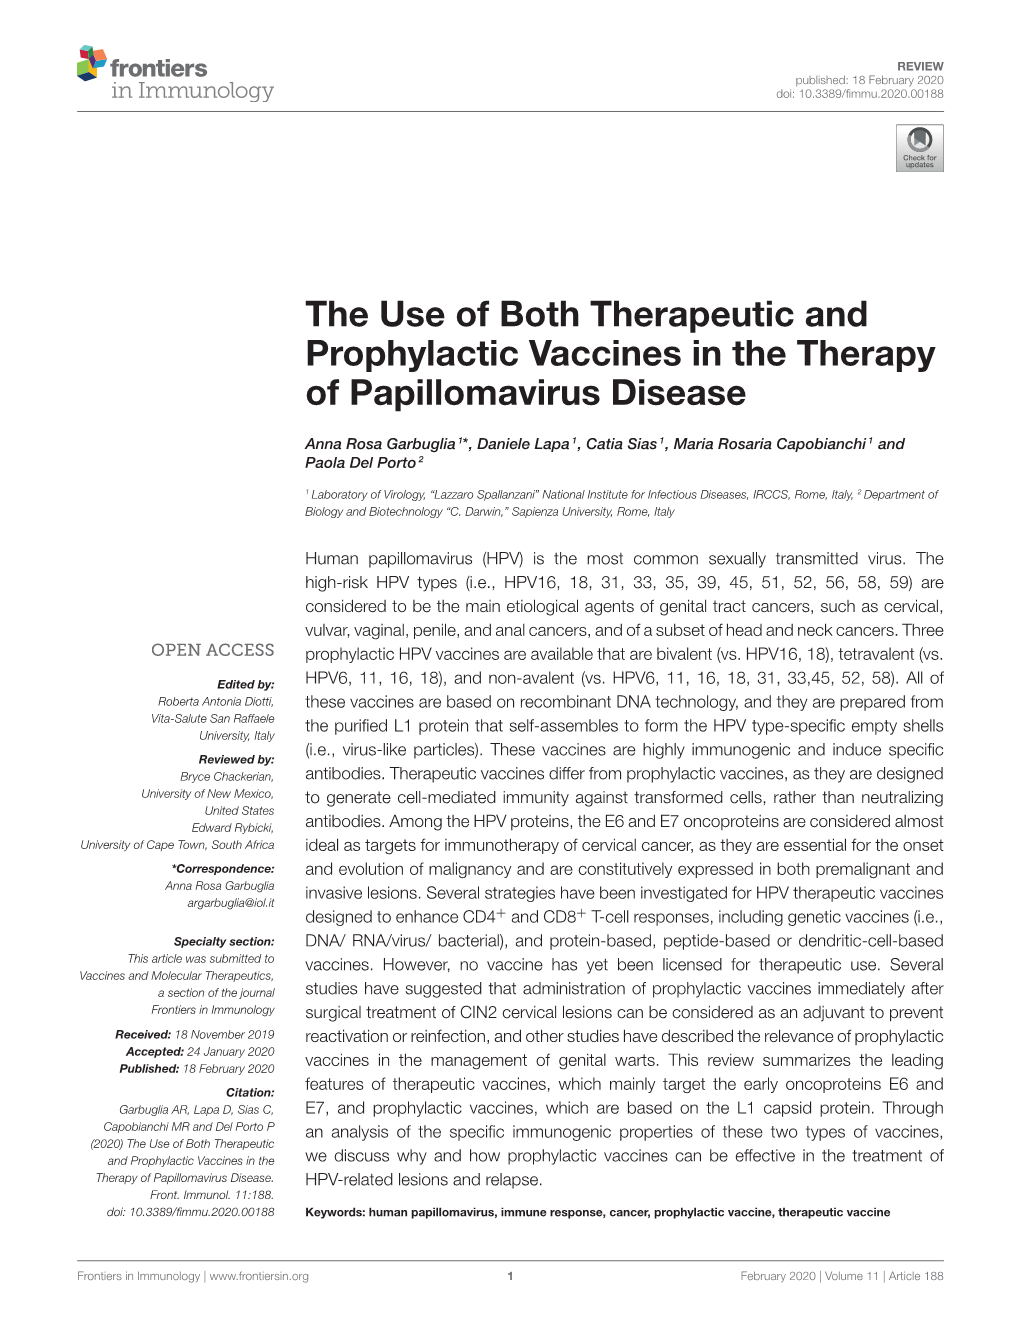 The Use of Both Therapeutic and Prophylactic Vaccines in the Therapy of Papillomavirus Disease